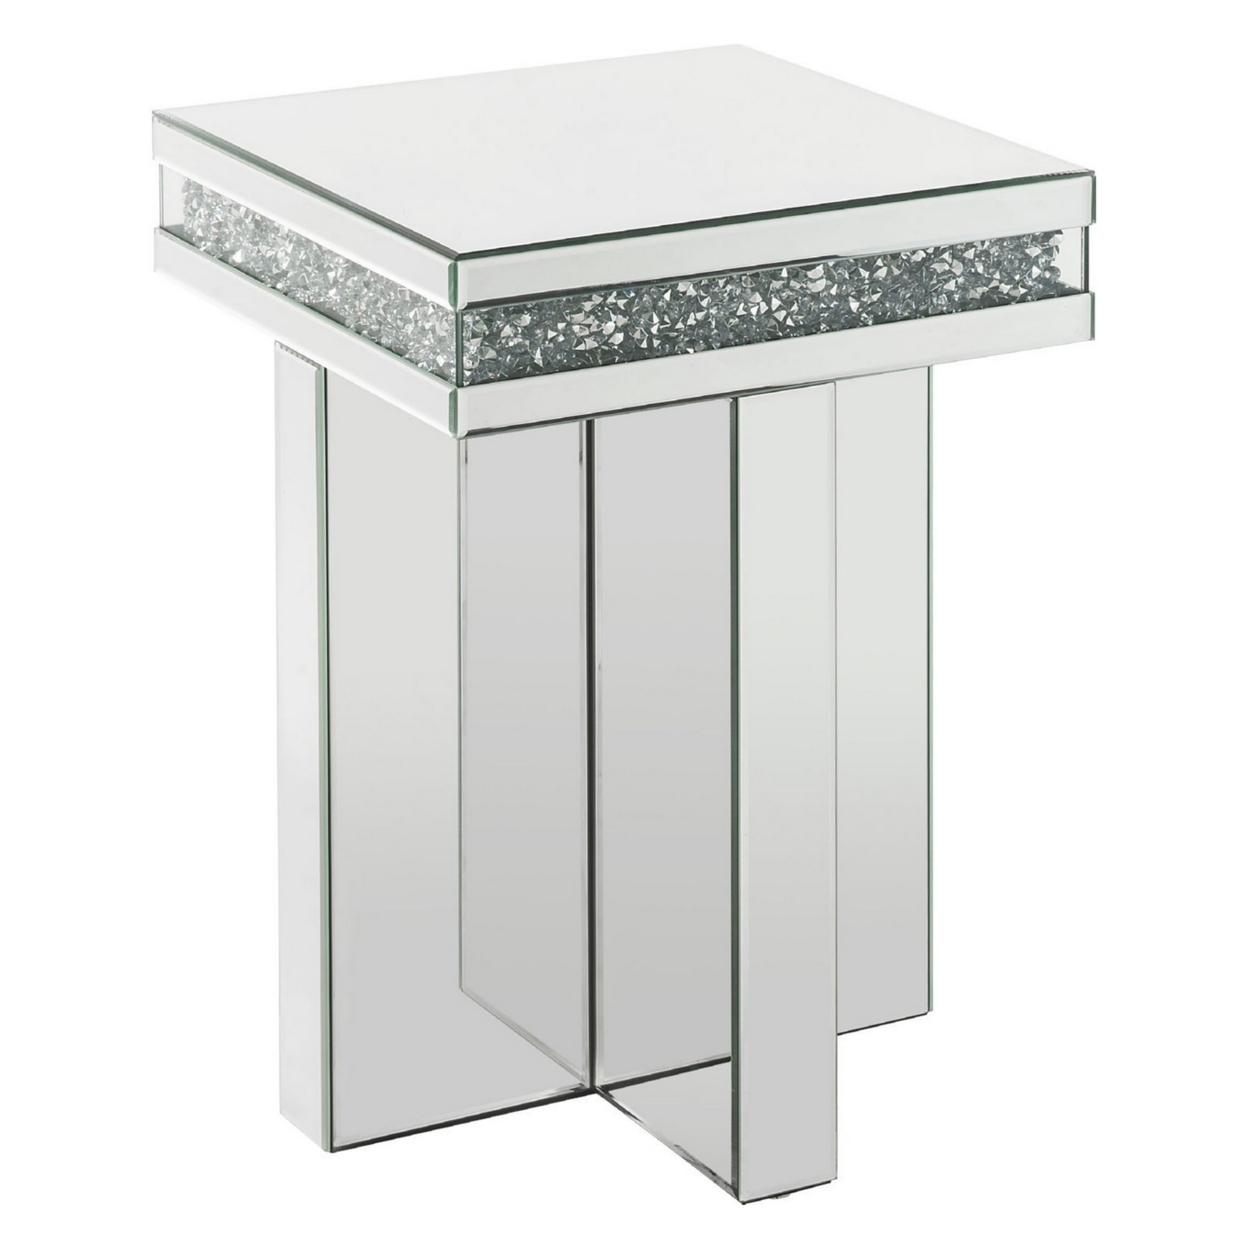 End Table With Encrusted Faux Acrylic Inlay And Cross Base, Silver- Saltoro Sherpi